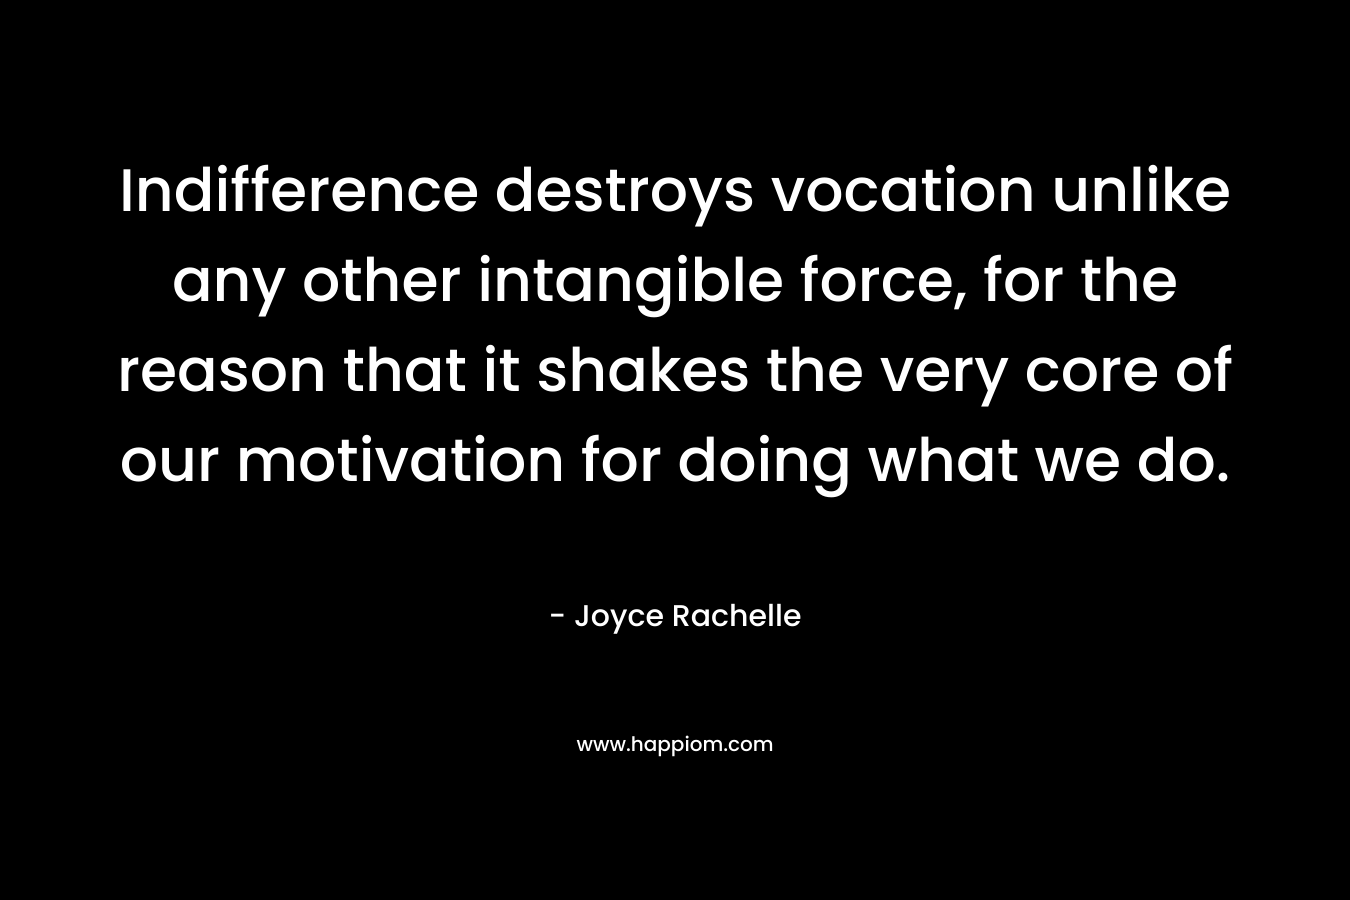 Indifference destroys vocation unlike any other intangible force, for the reason that it shakes the very core of our motivation for doing what we do. – Joyce Rachelle